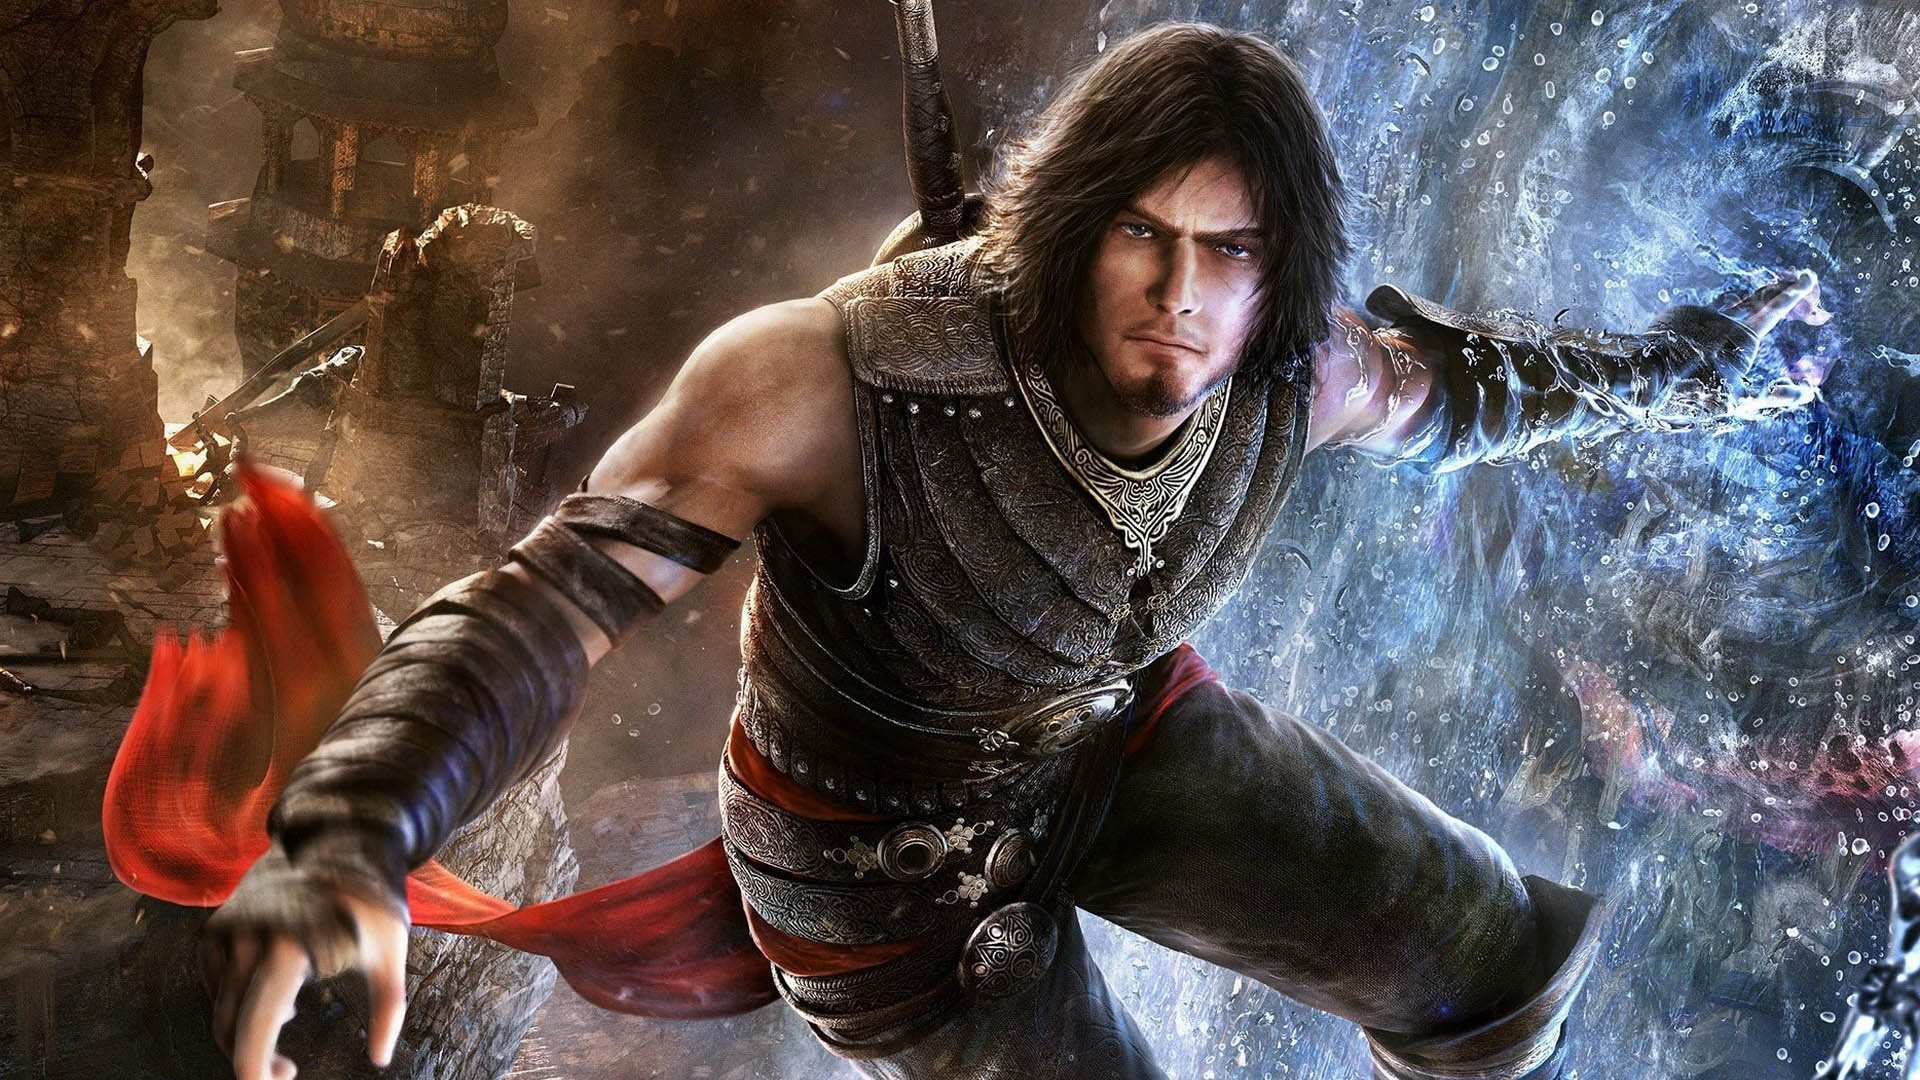 Prince of Persia Review - A Worthy Relaunch of the Franchise - Game Informer